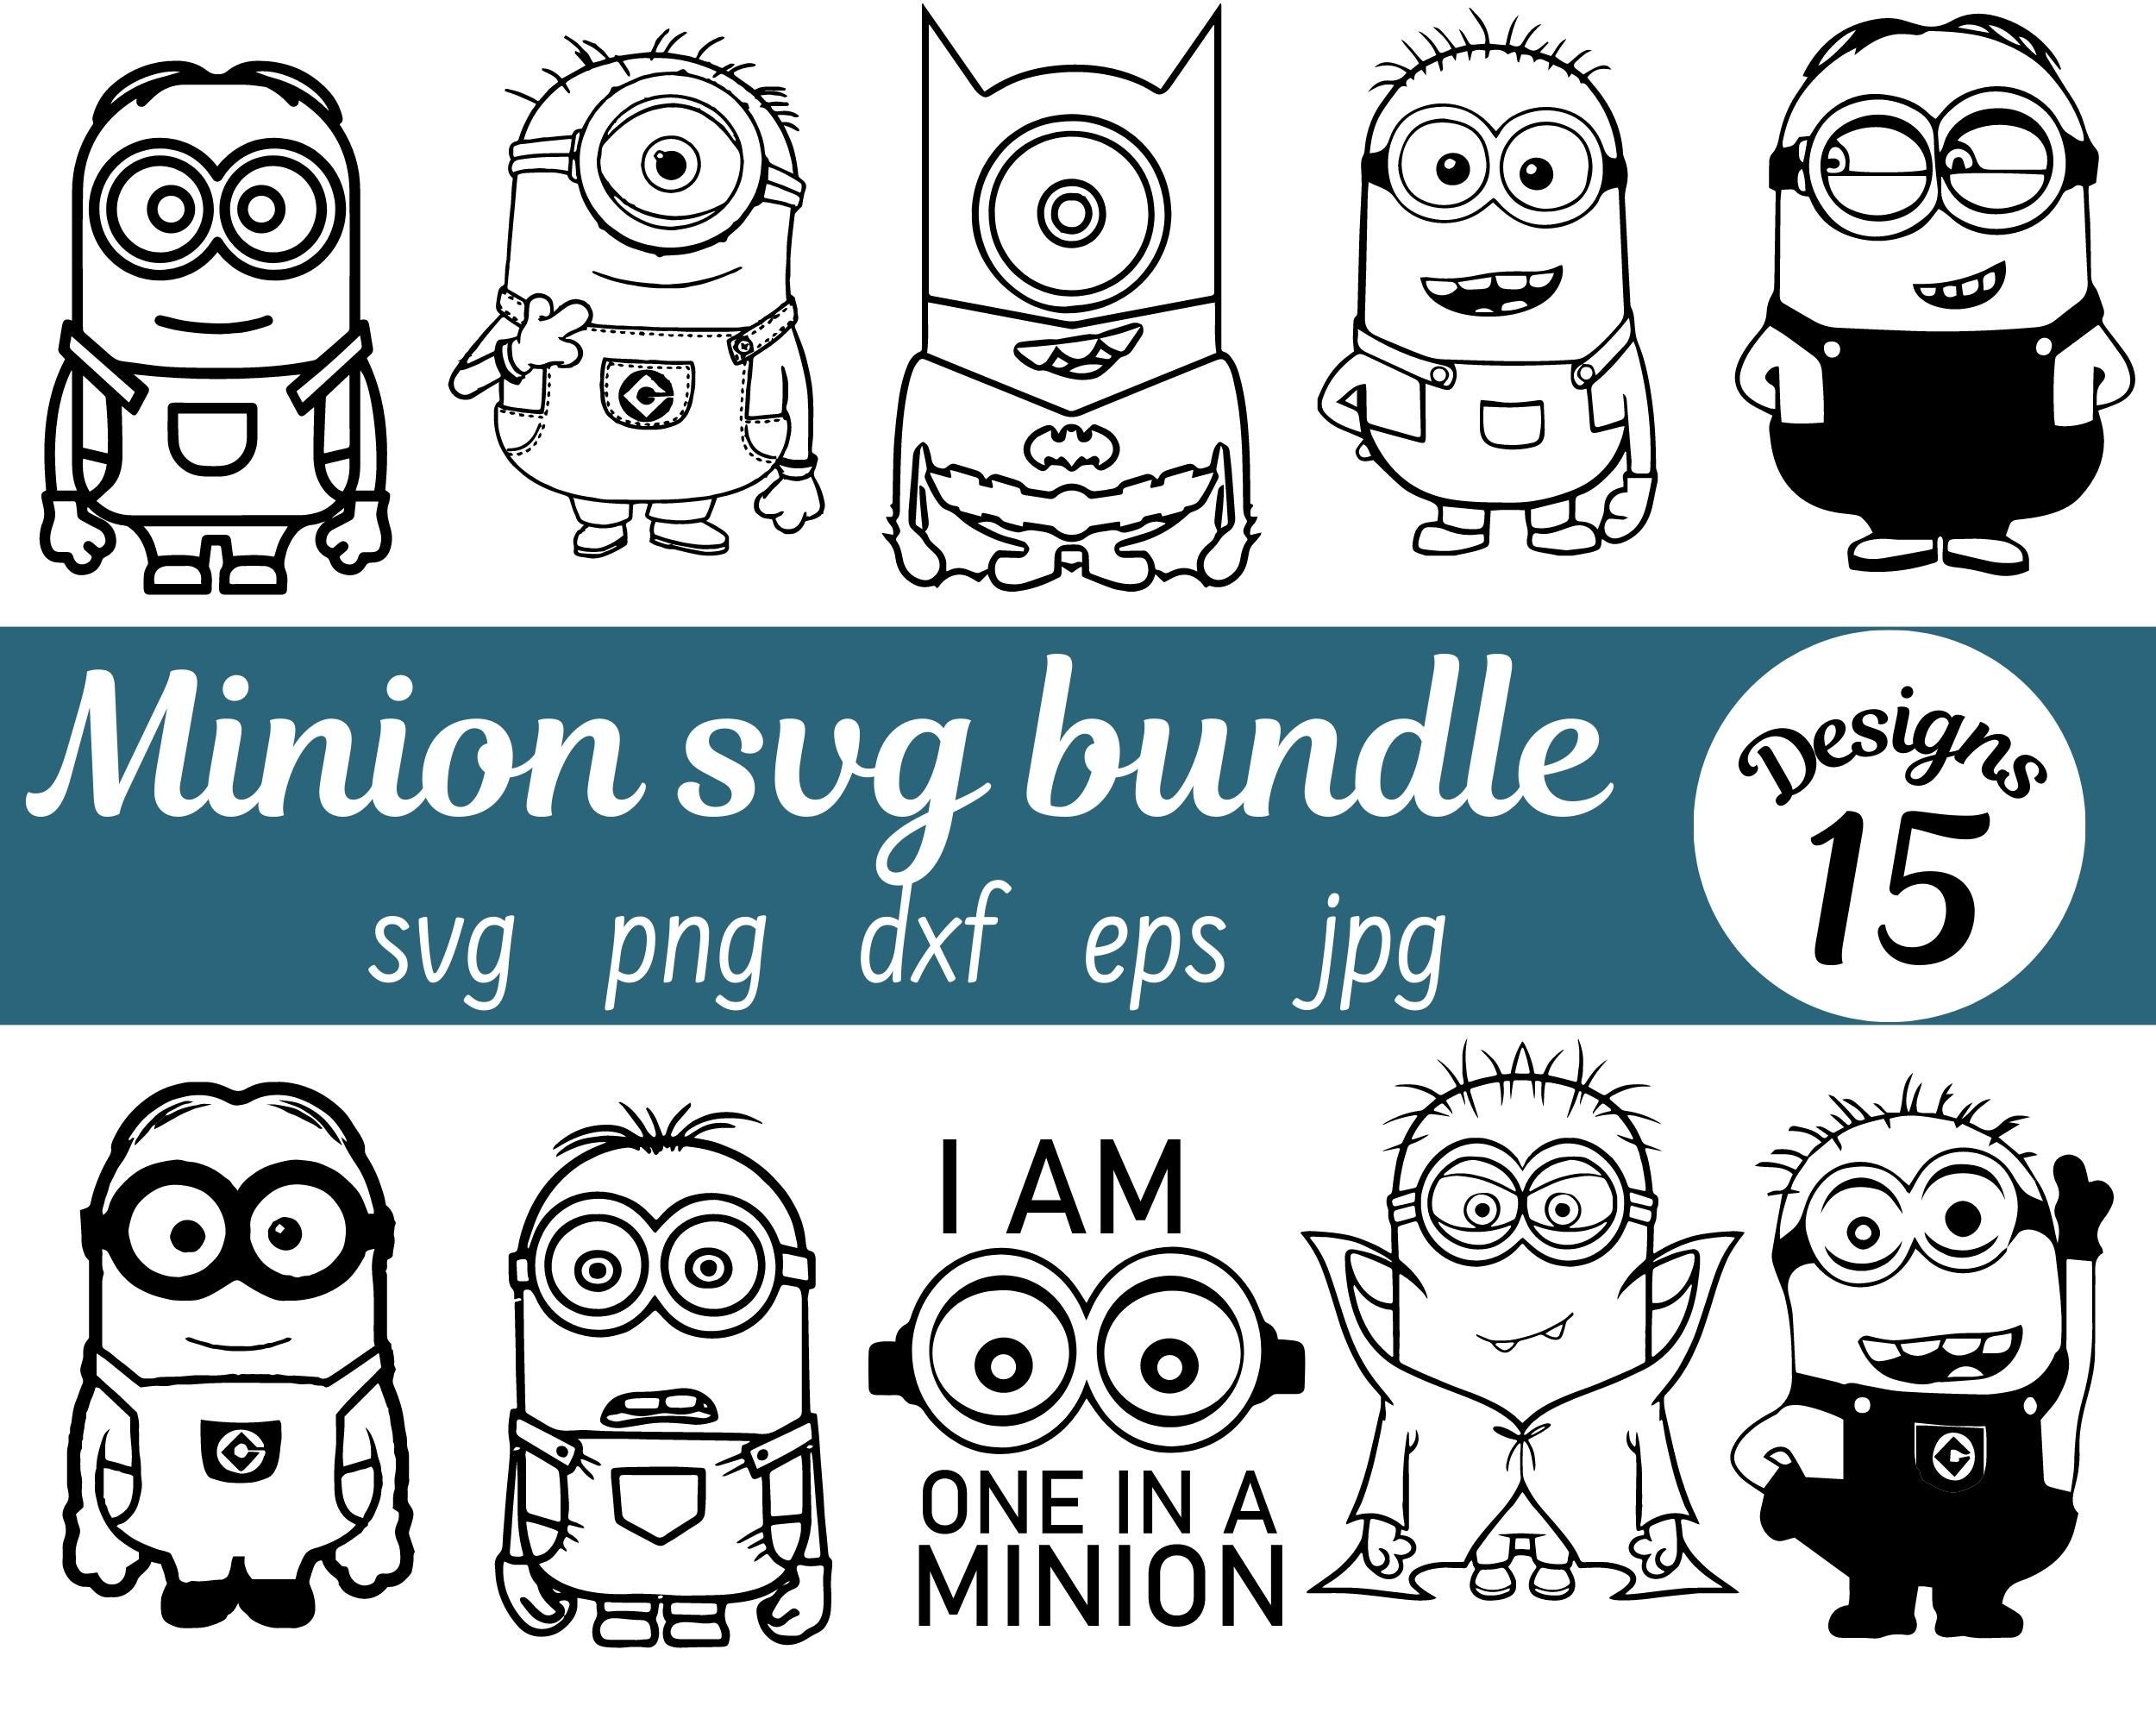 Minions Stickers Party Favors - Bundle of 2 Sticker Packs - 12 Sheets 240+  Stickers Plus 2 Specialty Stickers!